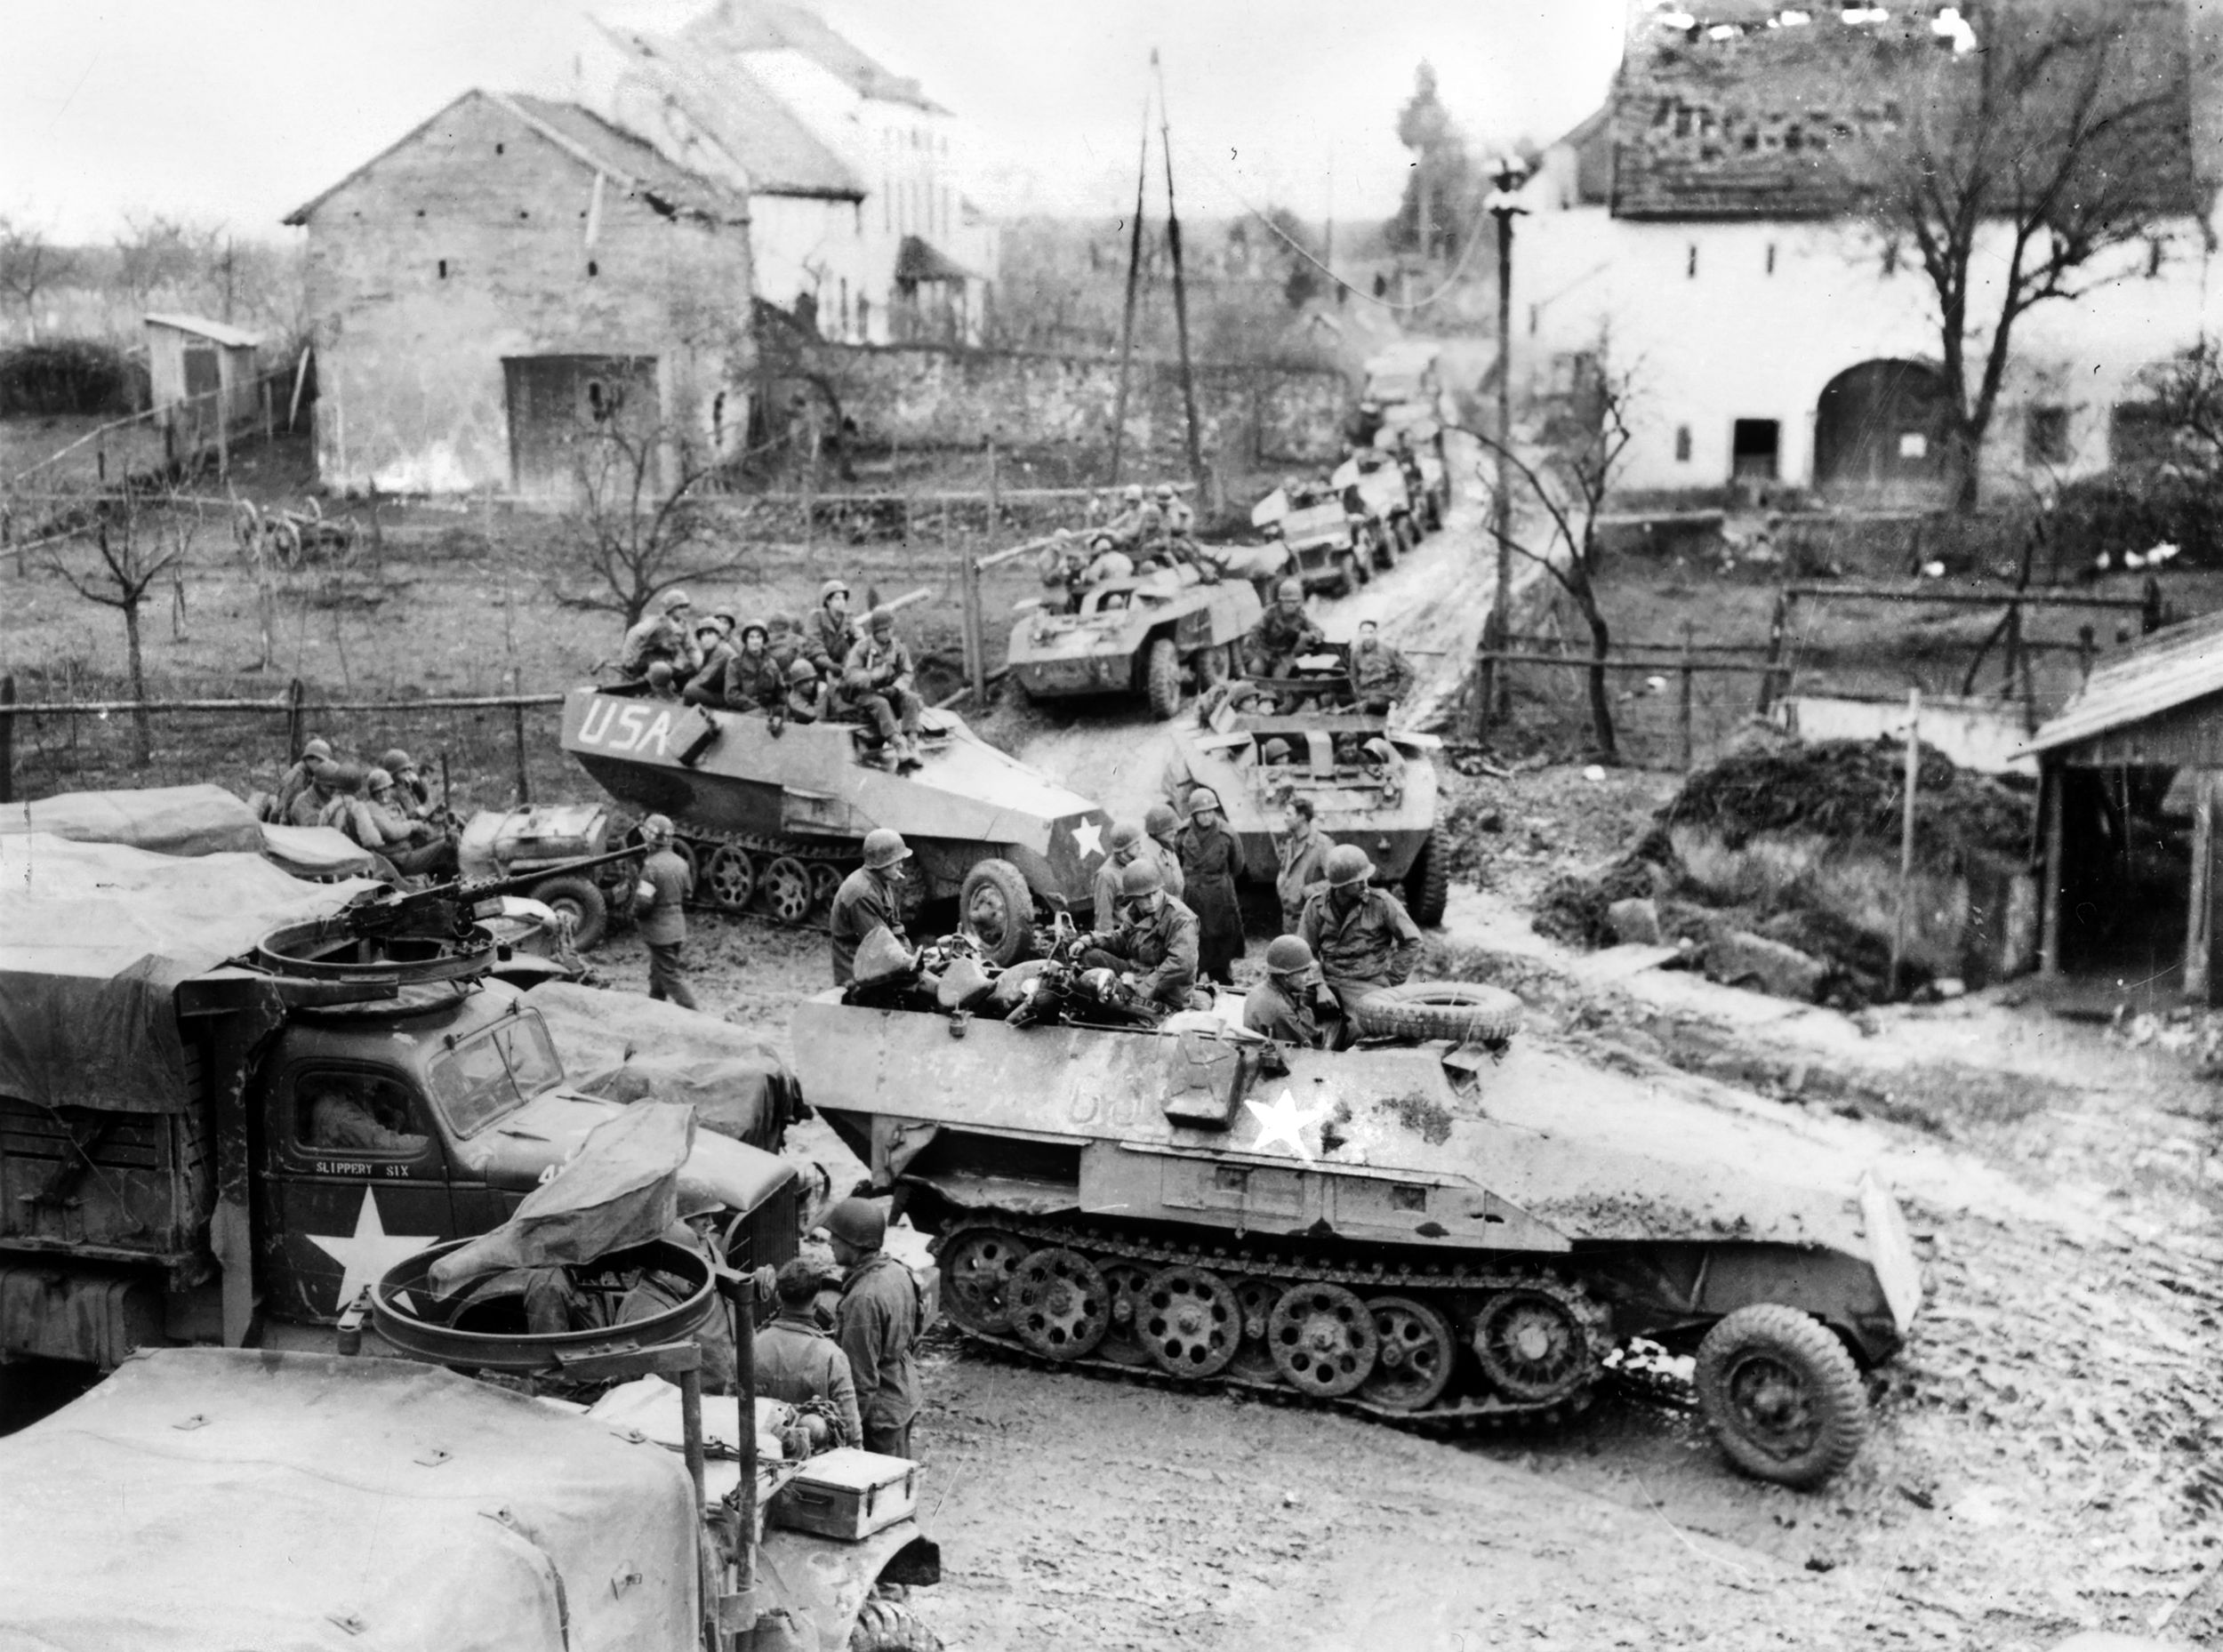 With several men in a captured German halftrack leading a column of vehicles, troops of the 5th U.S. Infantry Division wait for orders to move out from a Belgian village toward the Rhine River. The “Red Diamond” division would cross at Oppenheim on the night of March 22, 1945.